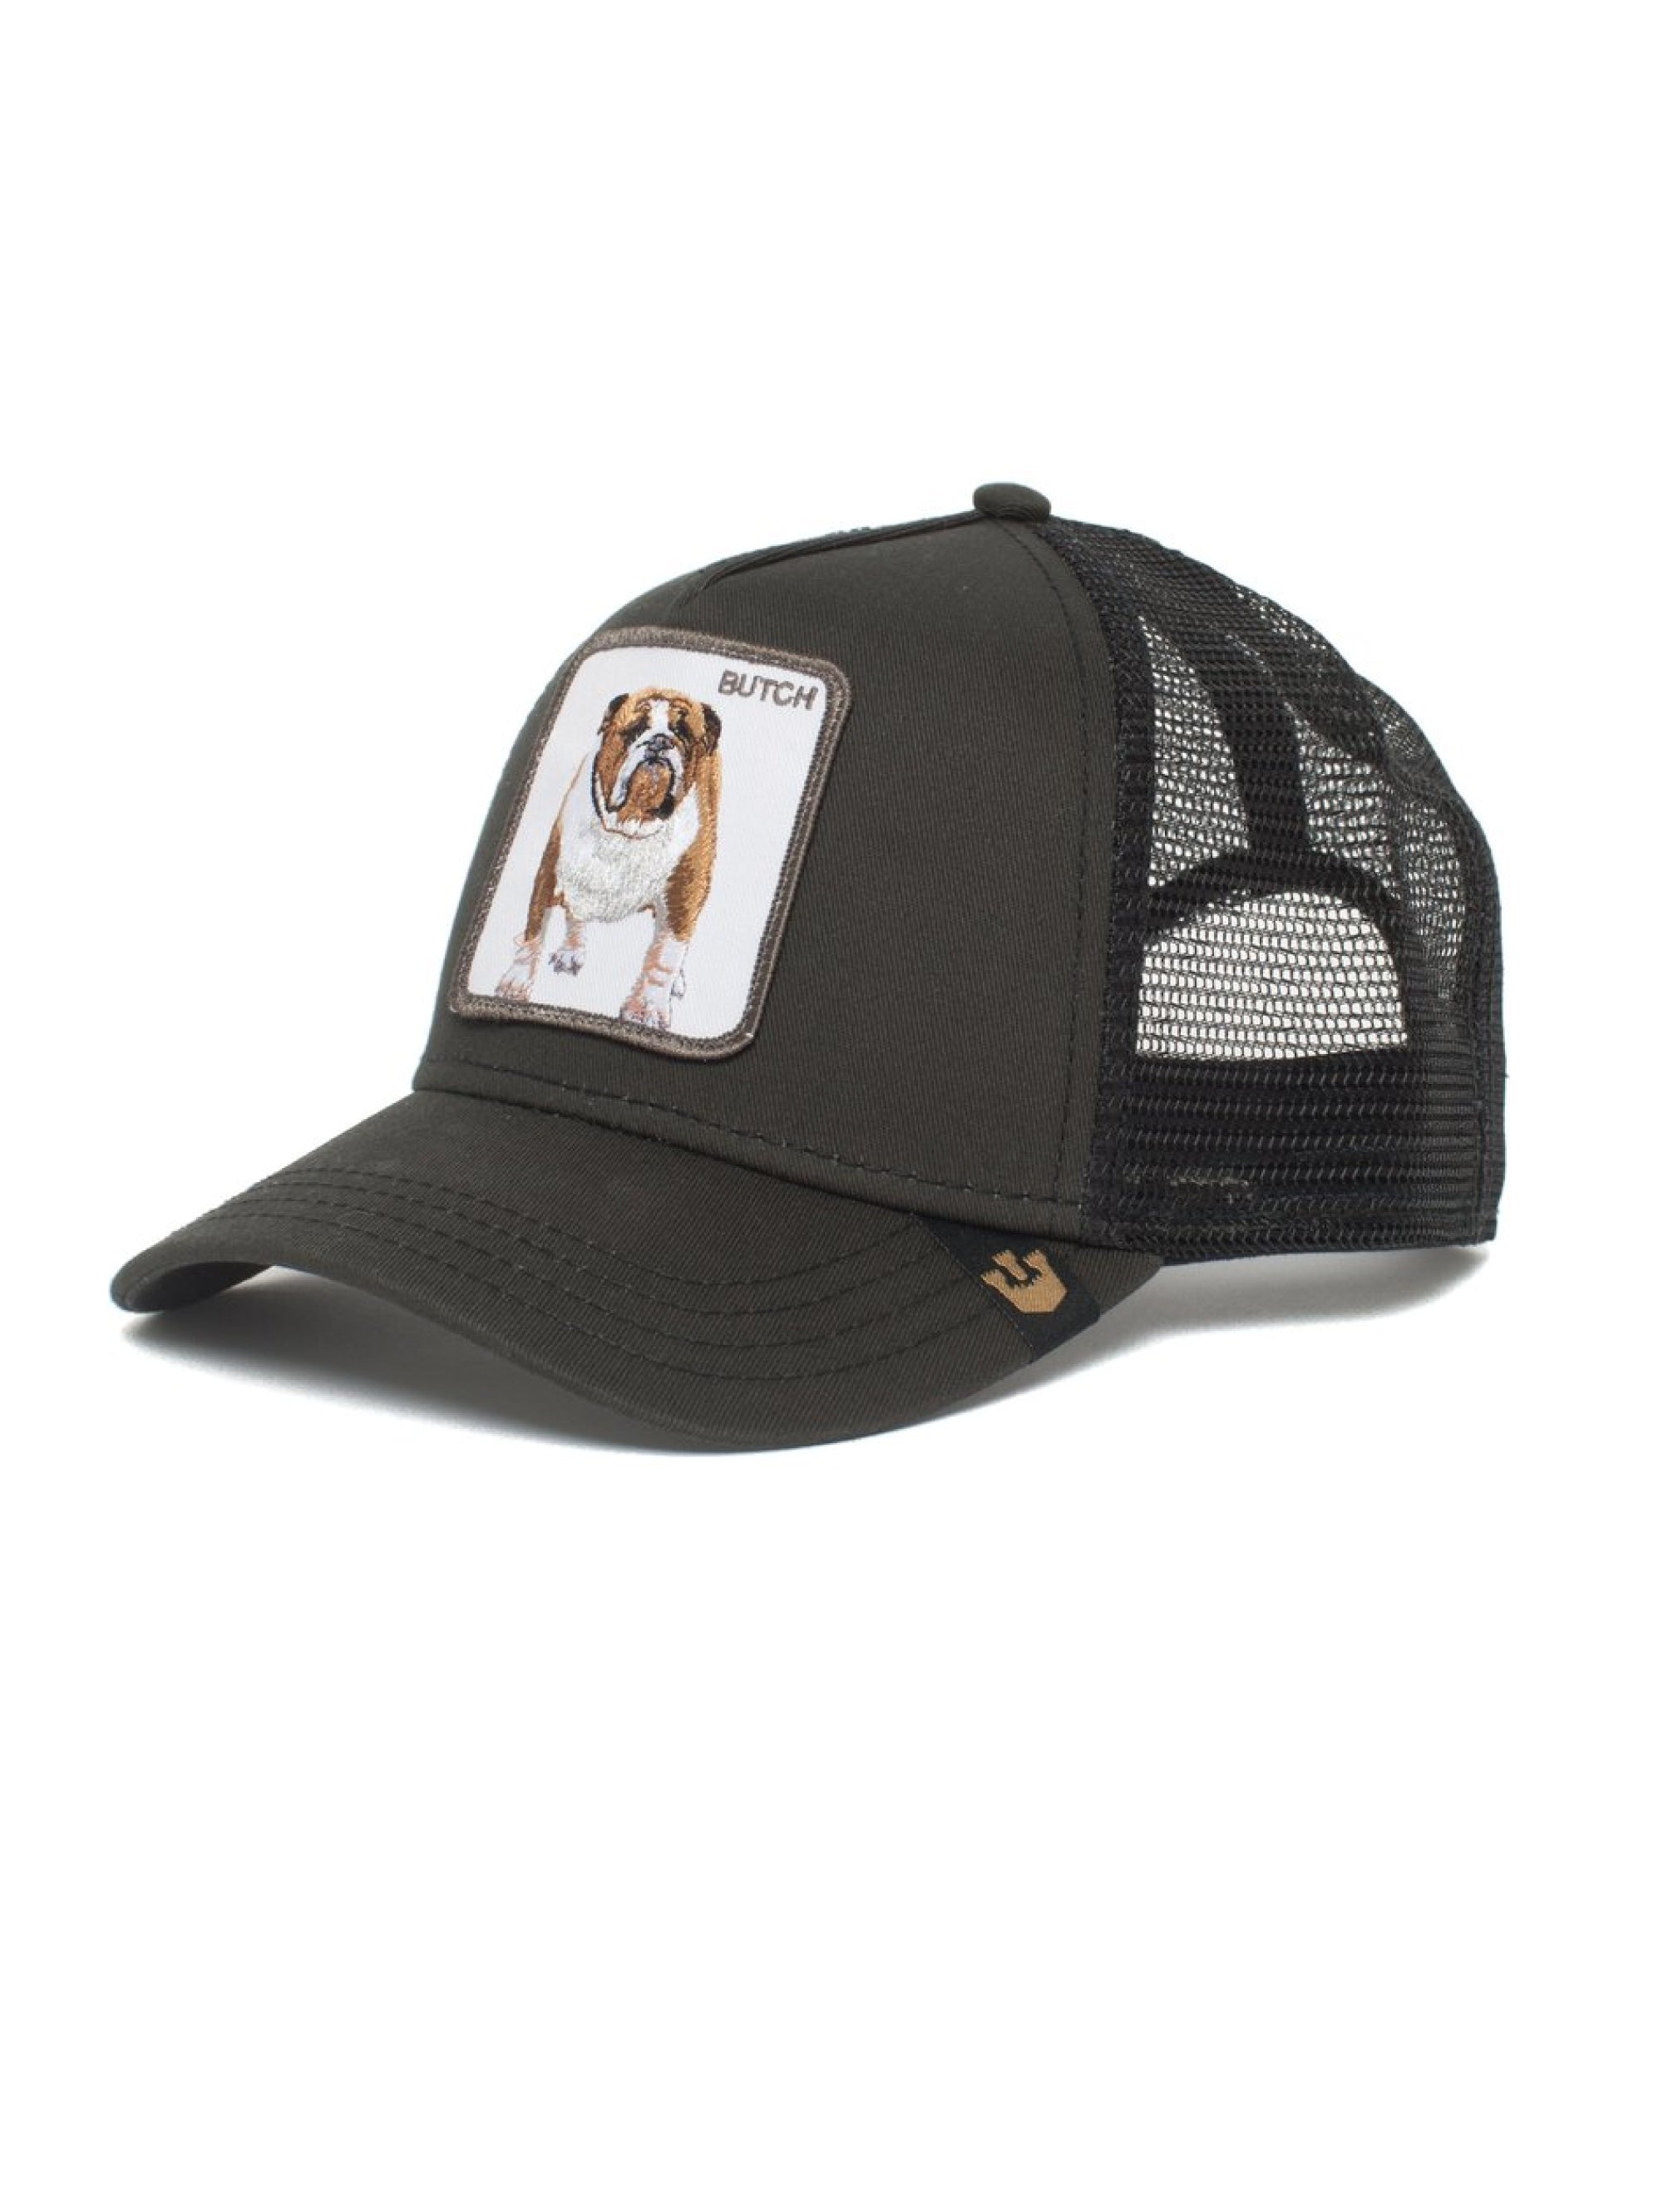 Cappello Trucker mit Patch The Butch